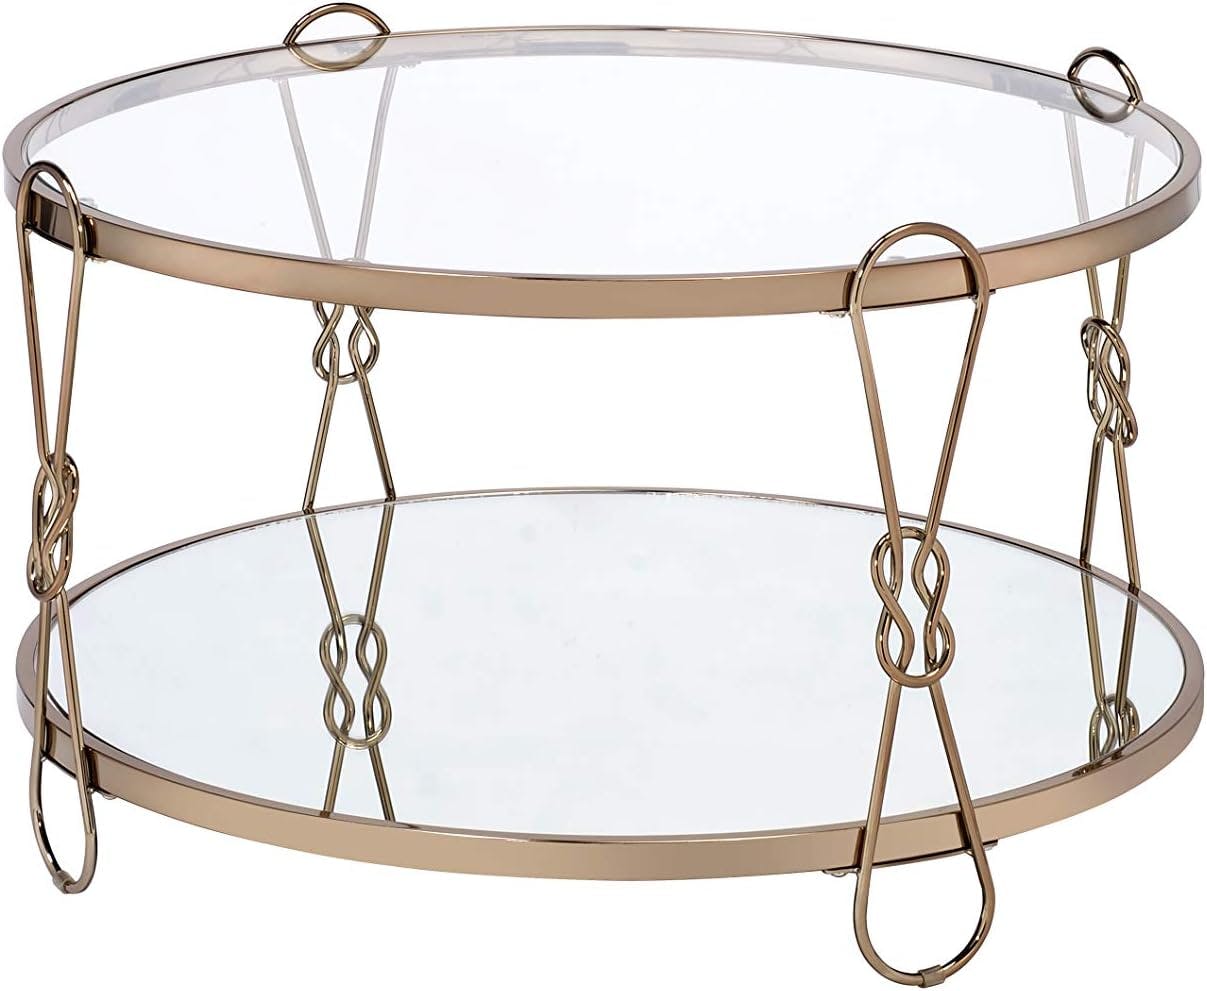 Zekera 32" Round Mirrored Coffee Table with Metal Base and Storage